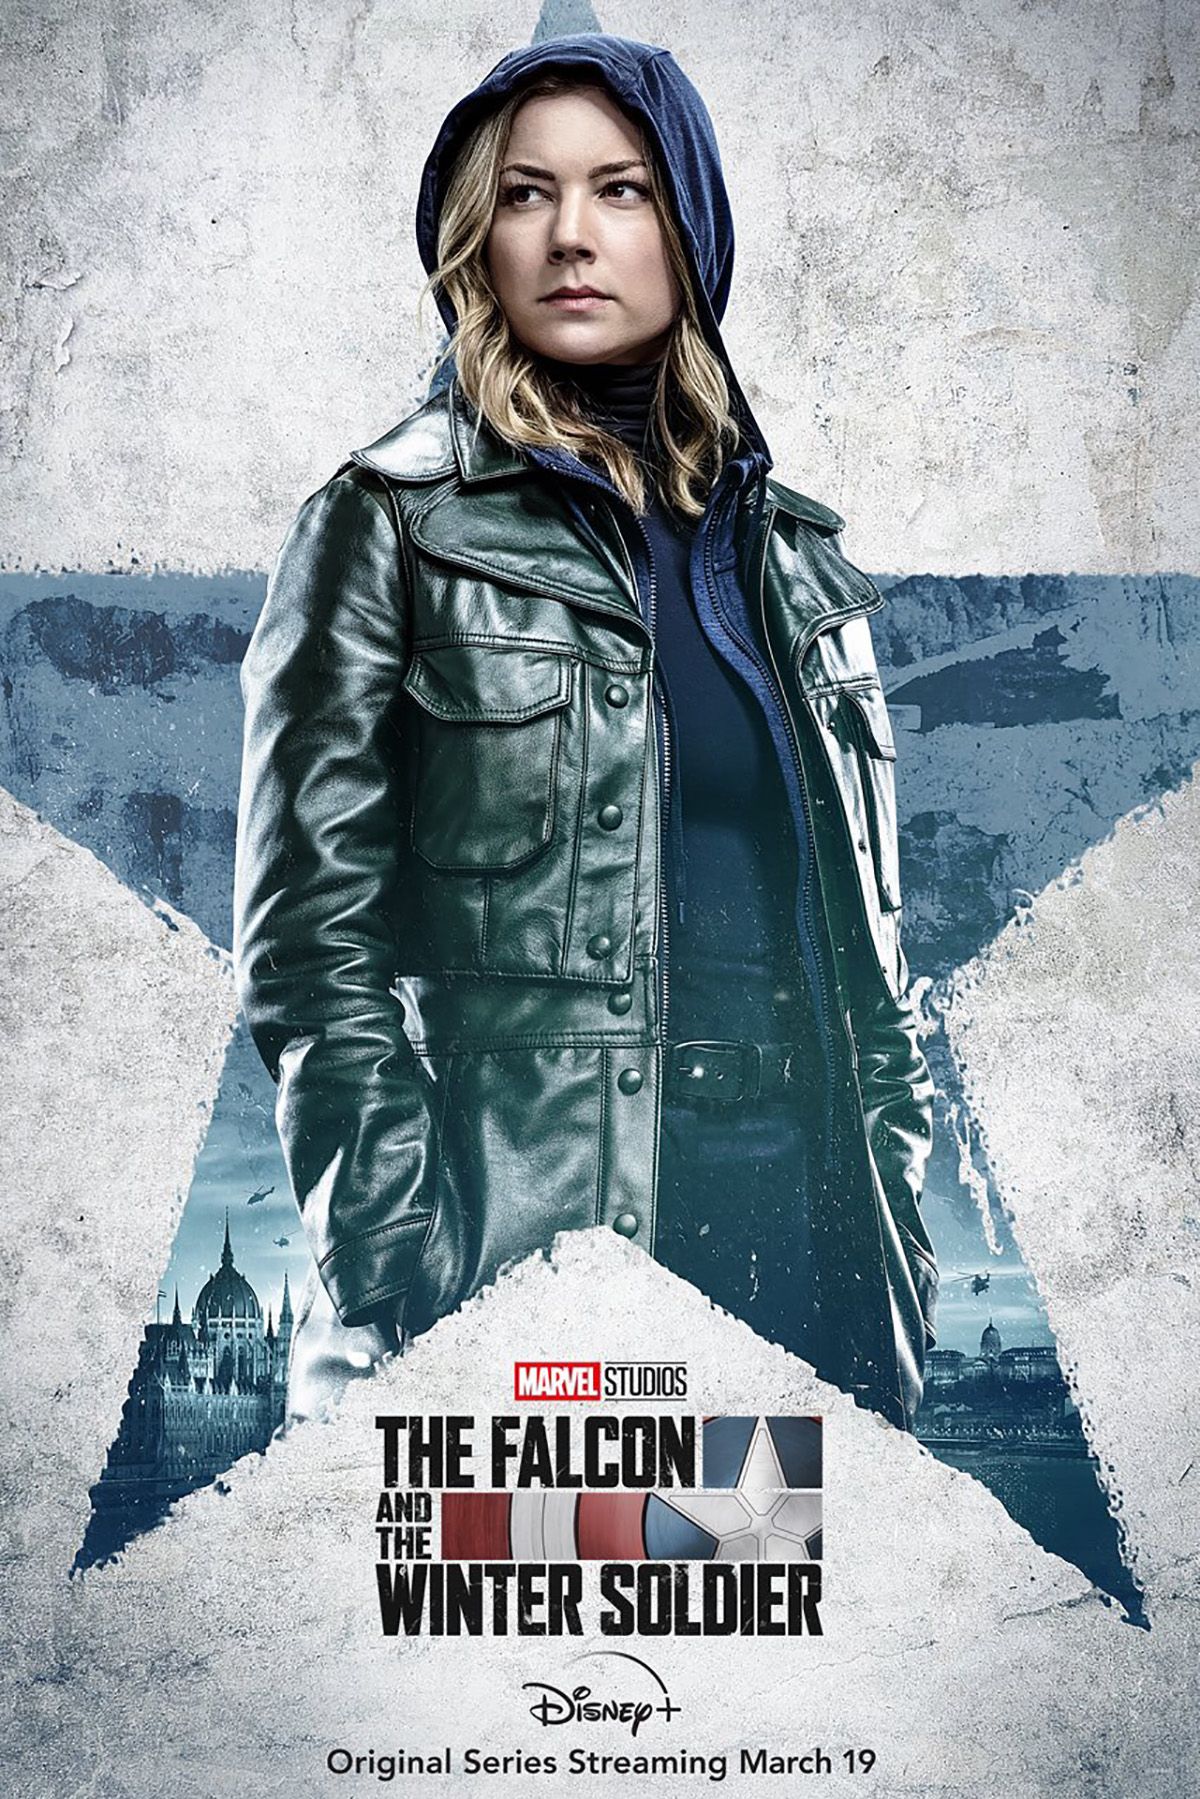 The Falcon and the Winter Soldier poster featuring Emily VanCamp